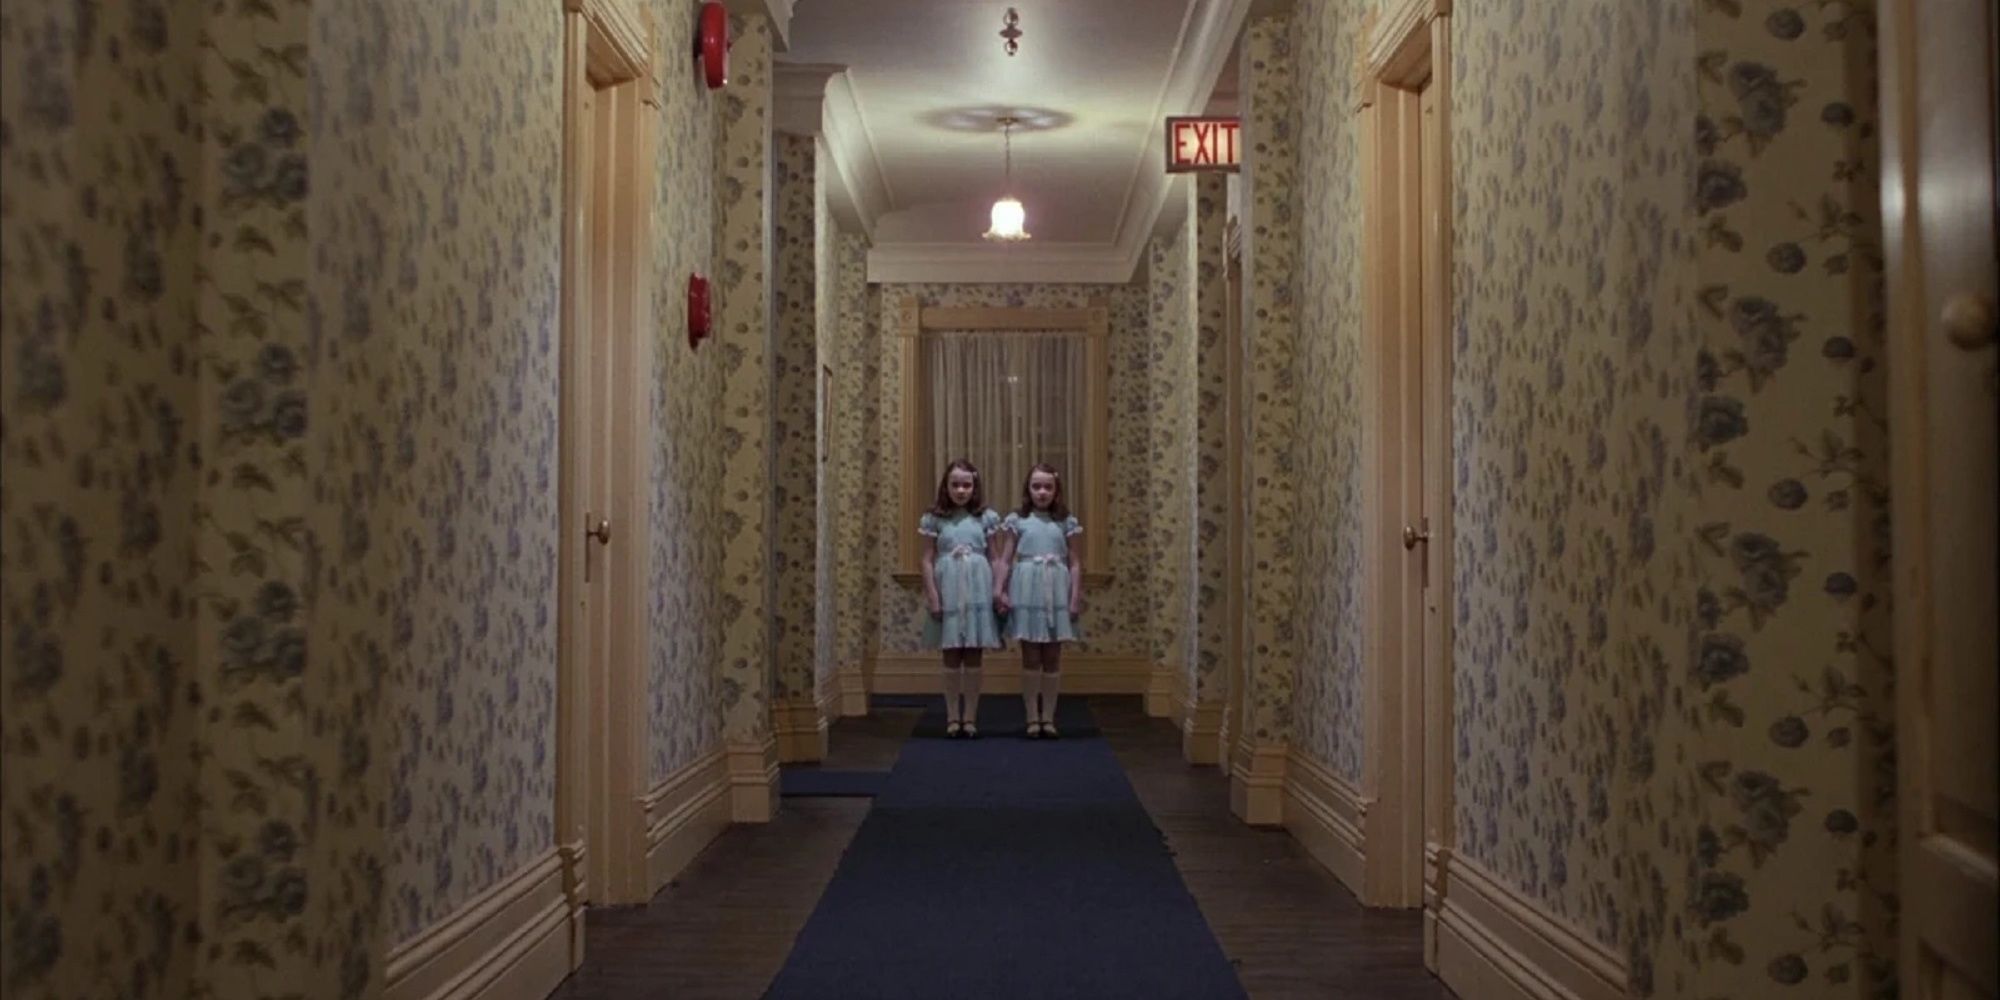 The Grady girls in the hallway in 'The Shining.'